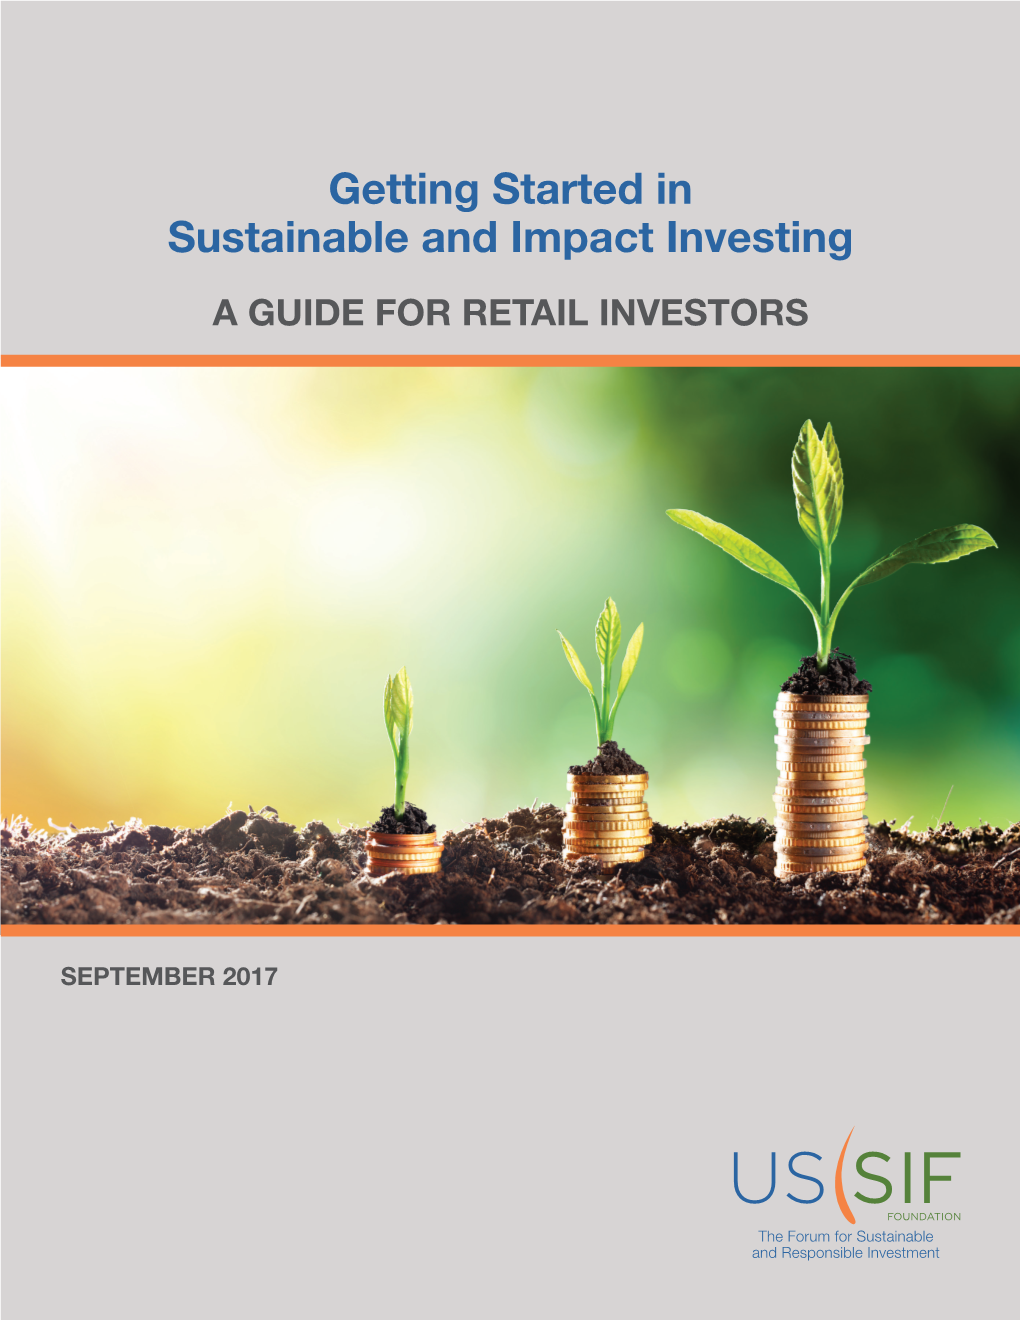 Getting Started in Sustainable and Impact Investing: a Guide for Retail Investors 1 Its Summary Prospectus, Which You Can Find Online